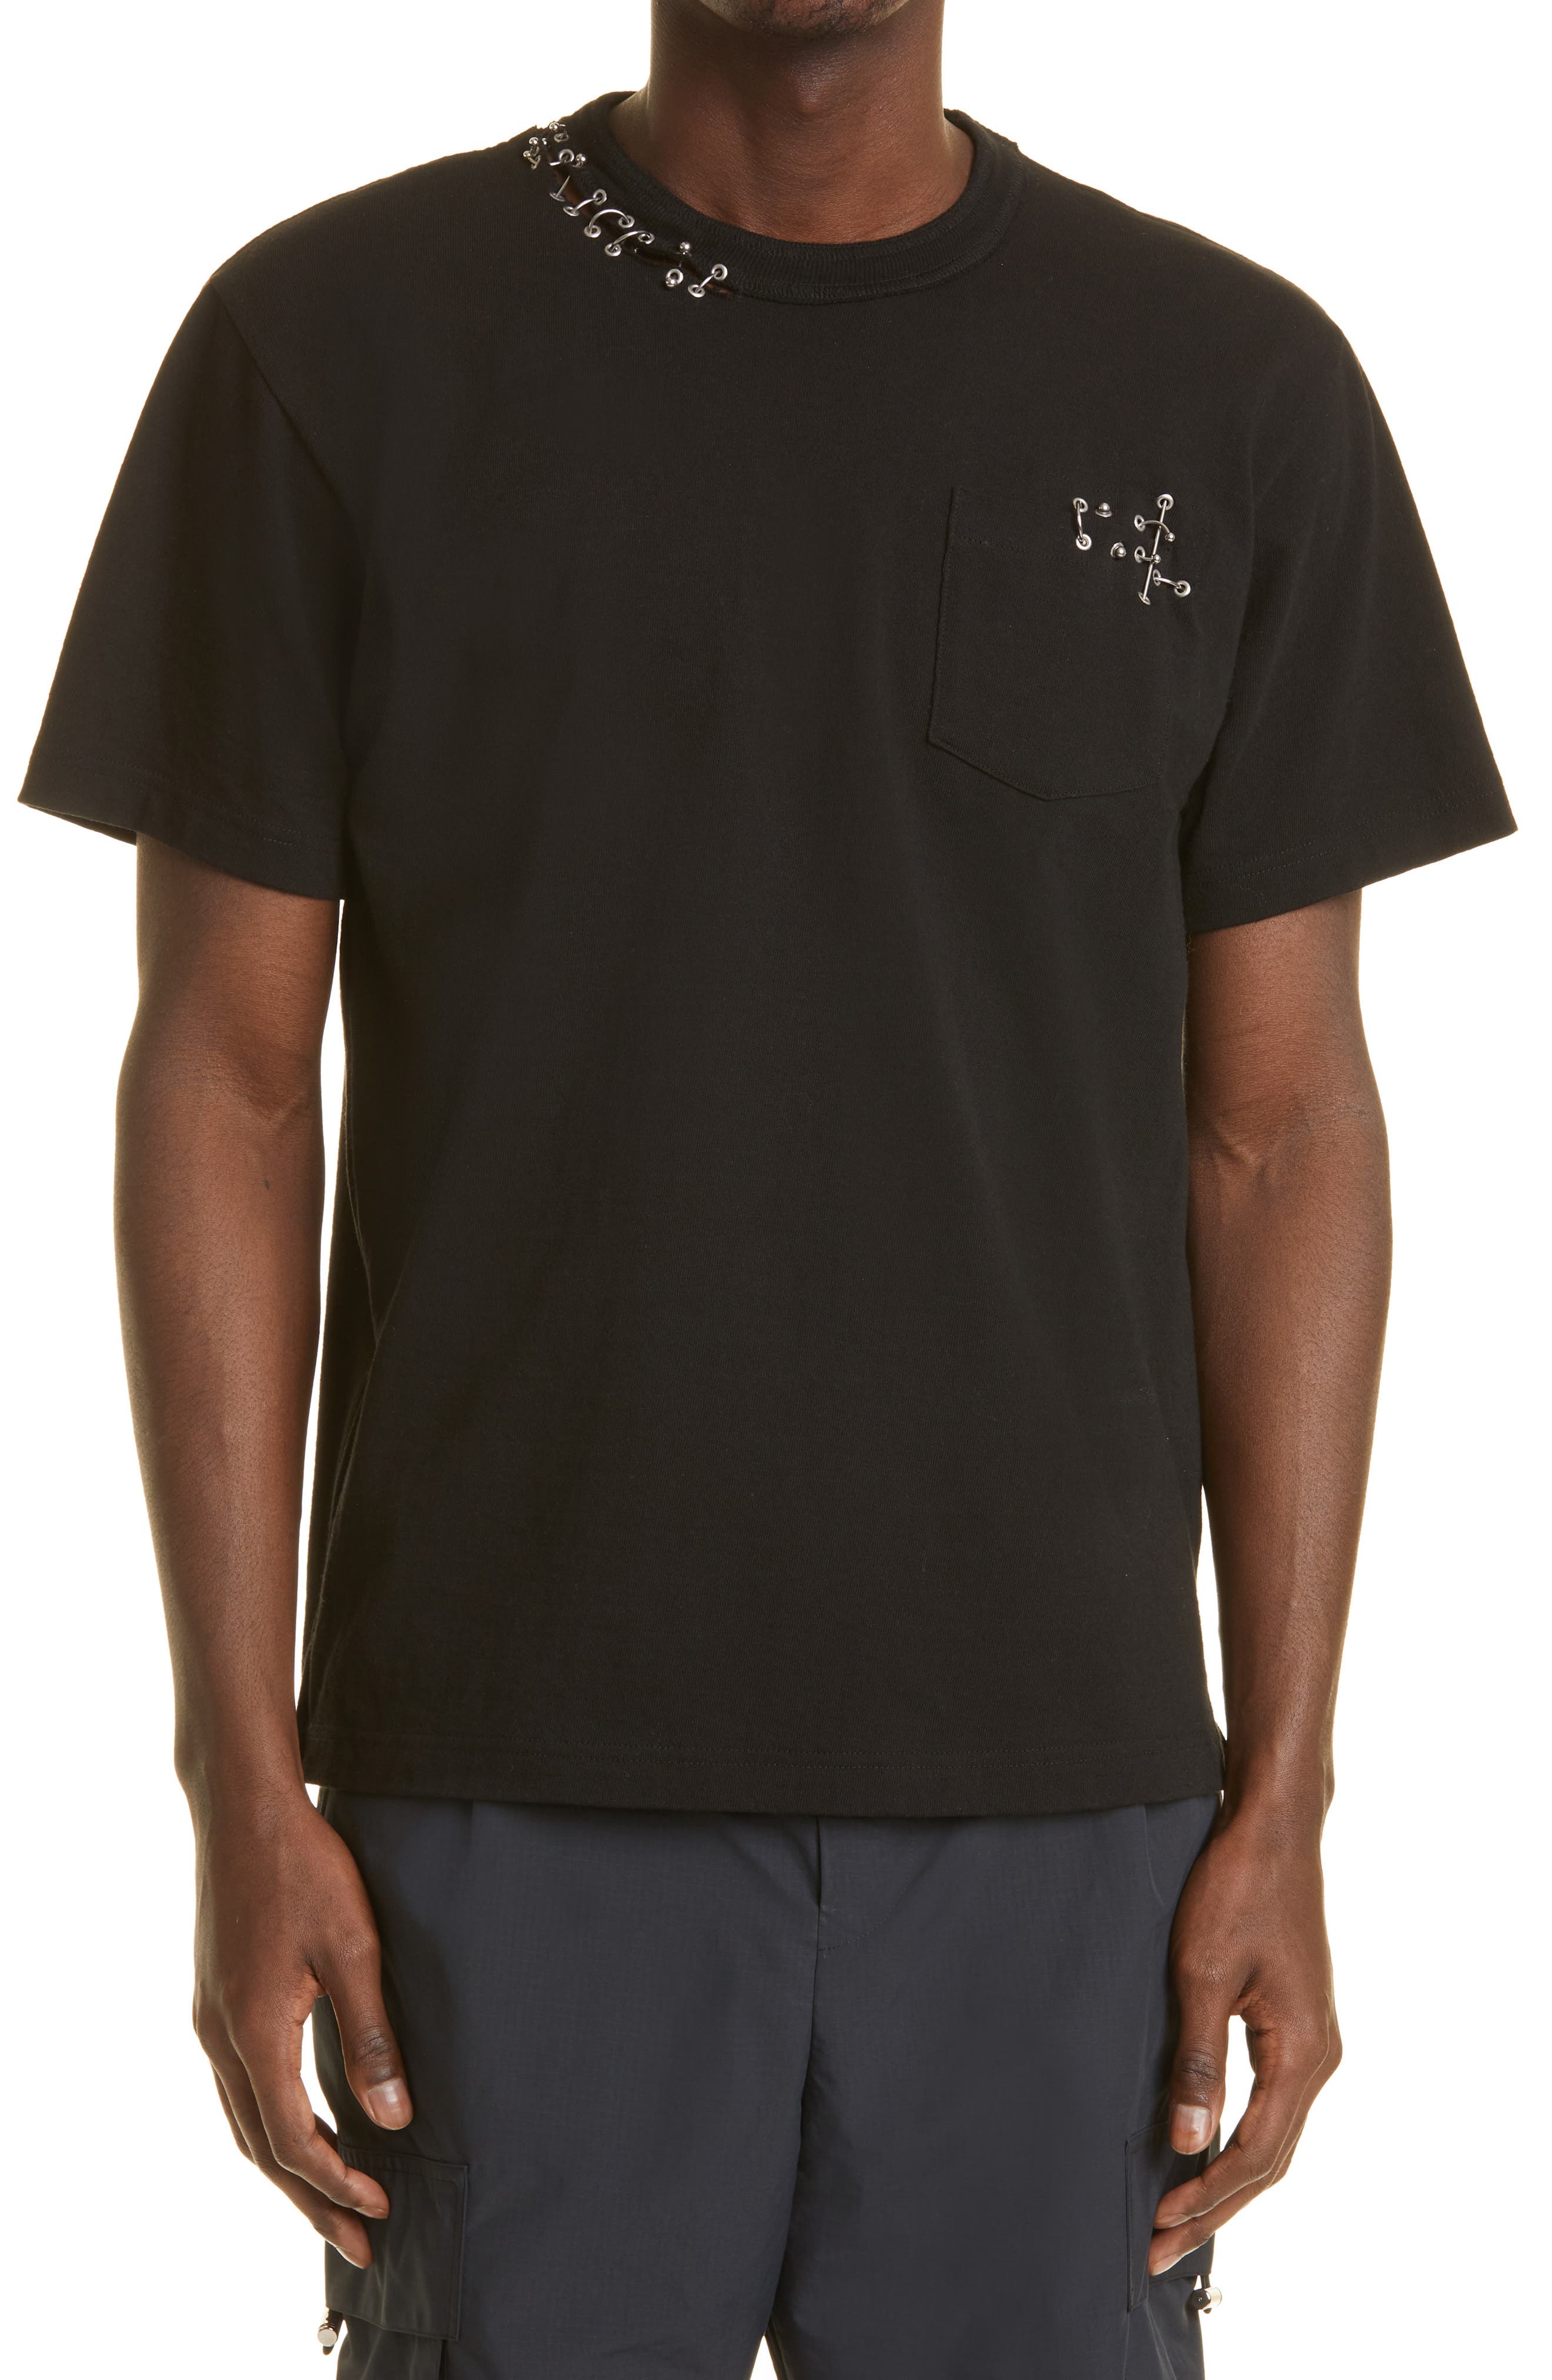 Sacai Pierced Pocket T-Shirt in Black at Nordstrom, Size 3